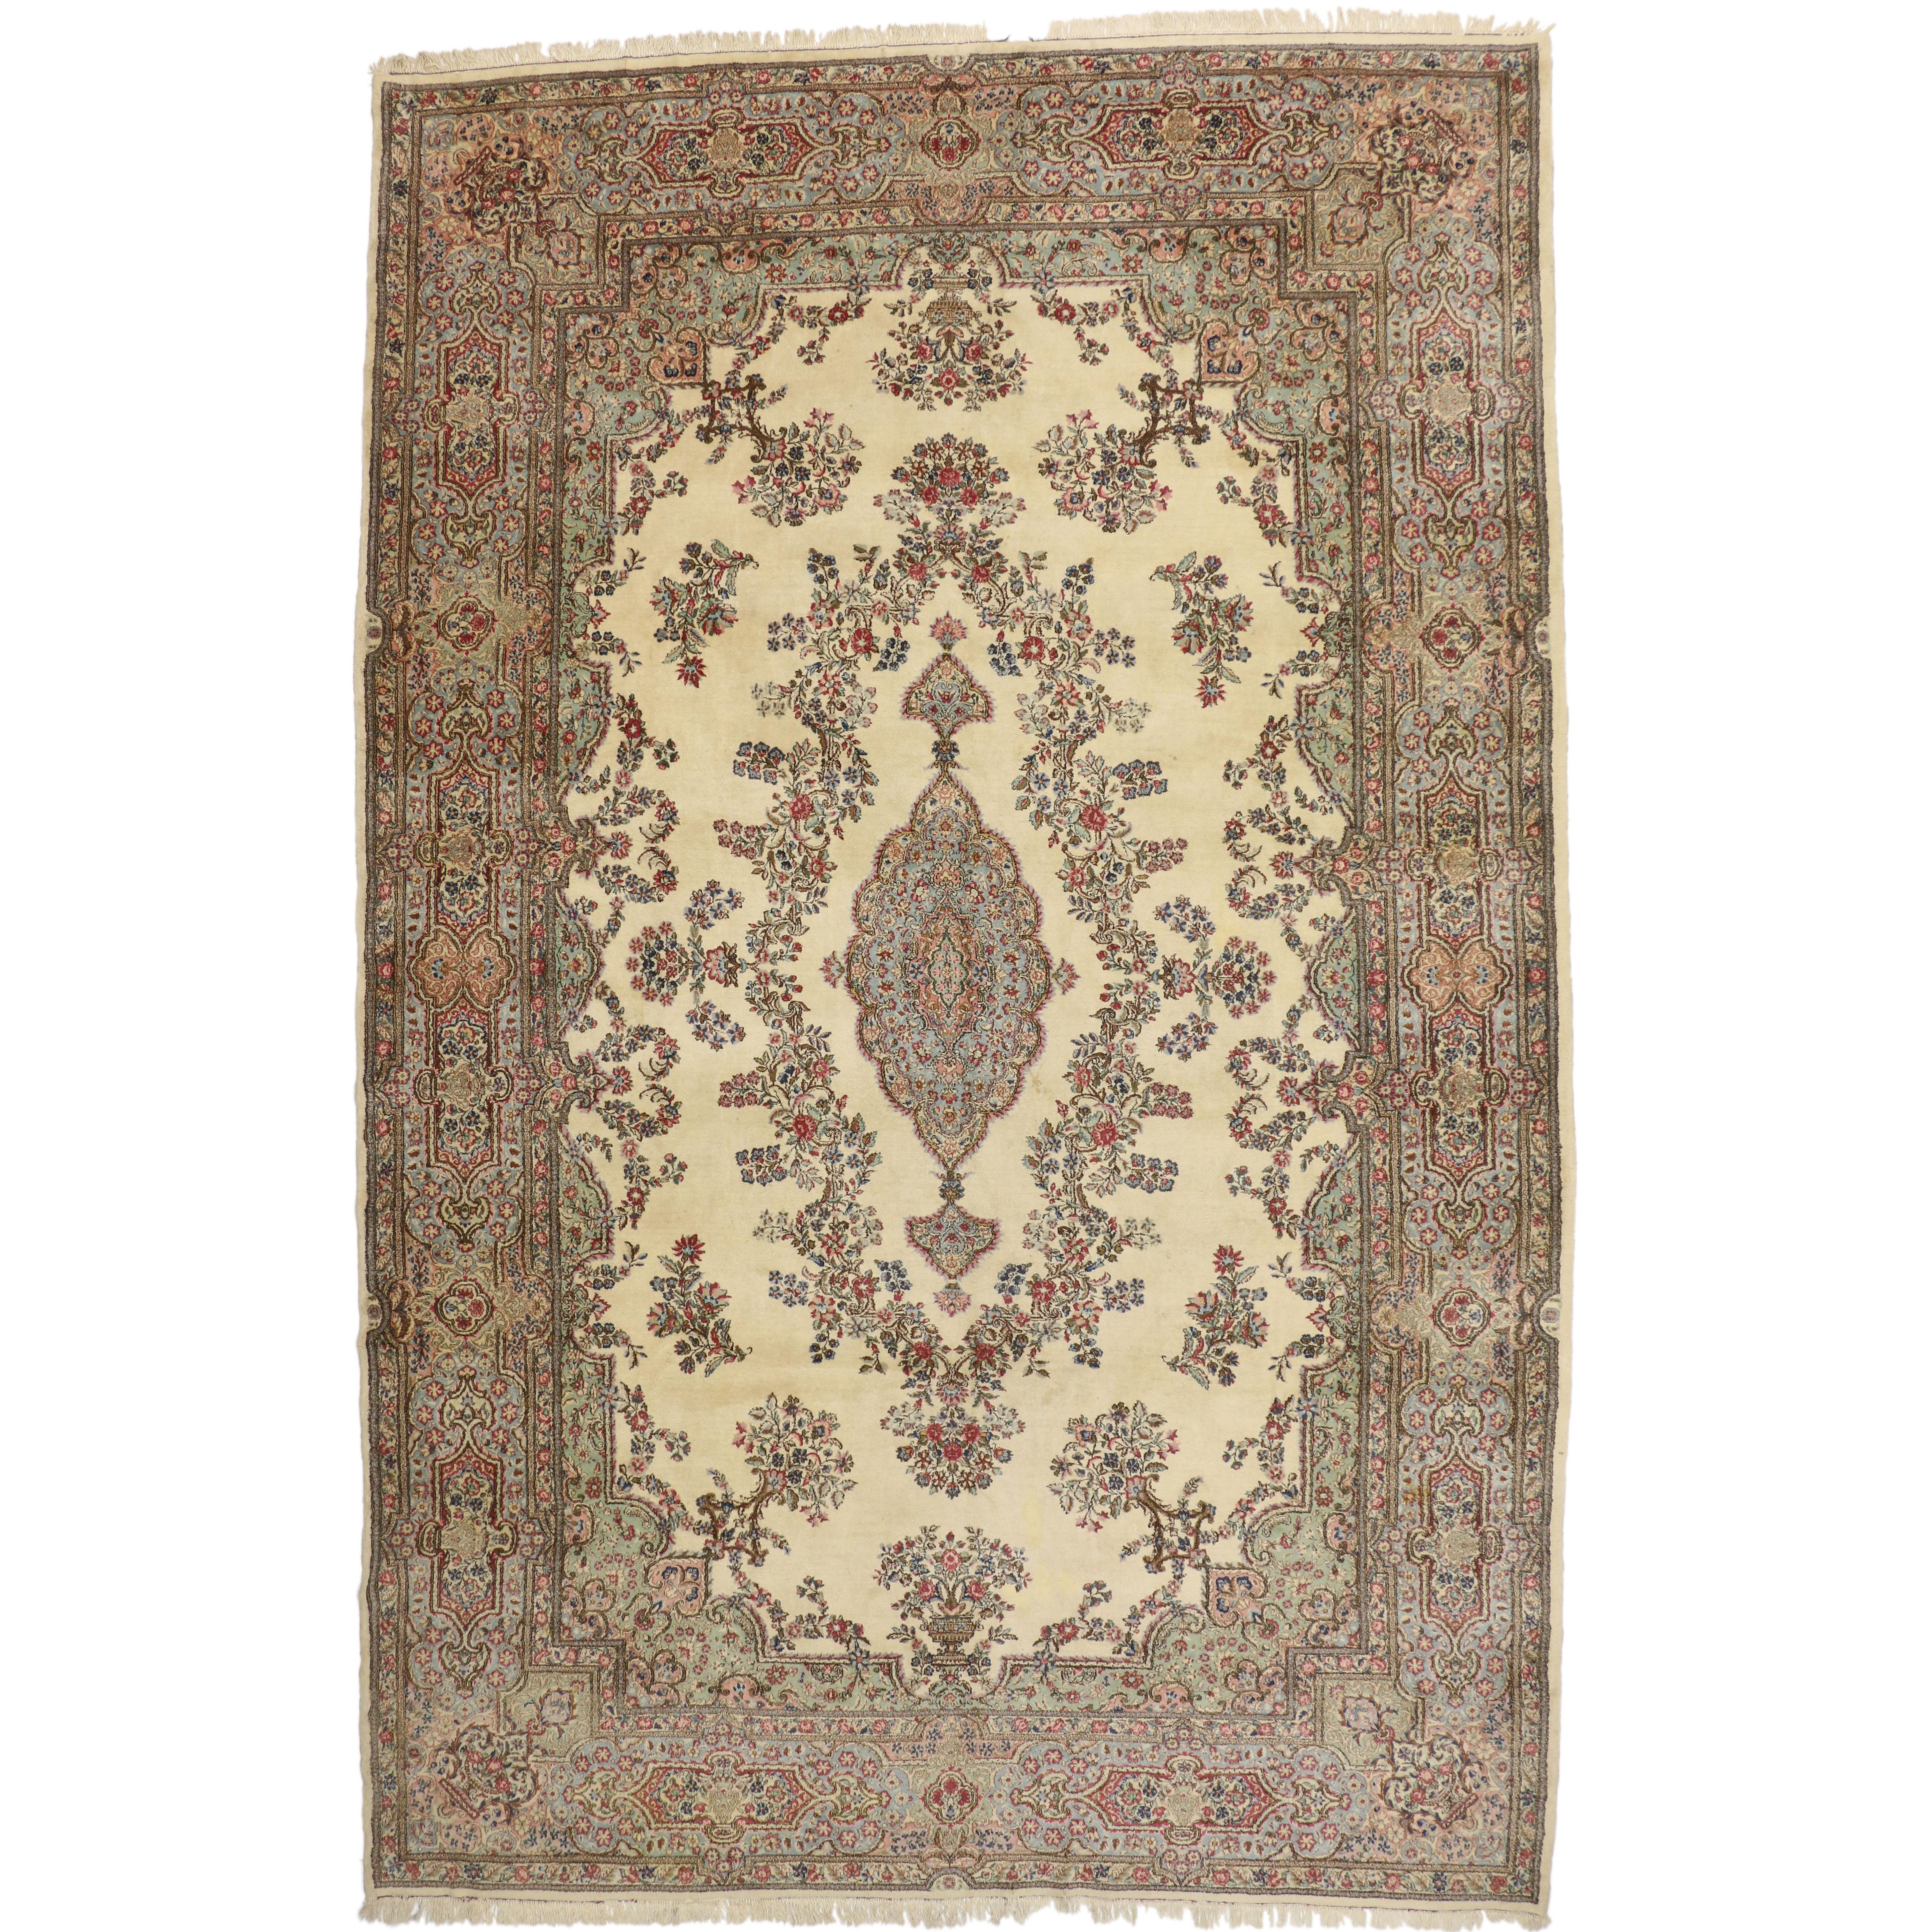 Oversized Antique Persian Kerman Rug with Romantic French Provincial Style For Sale